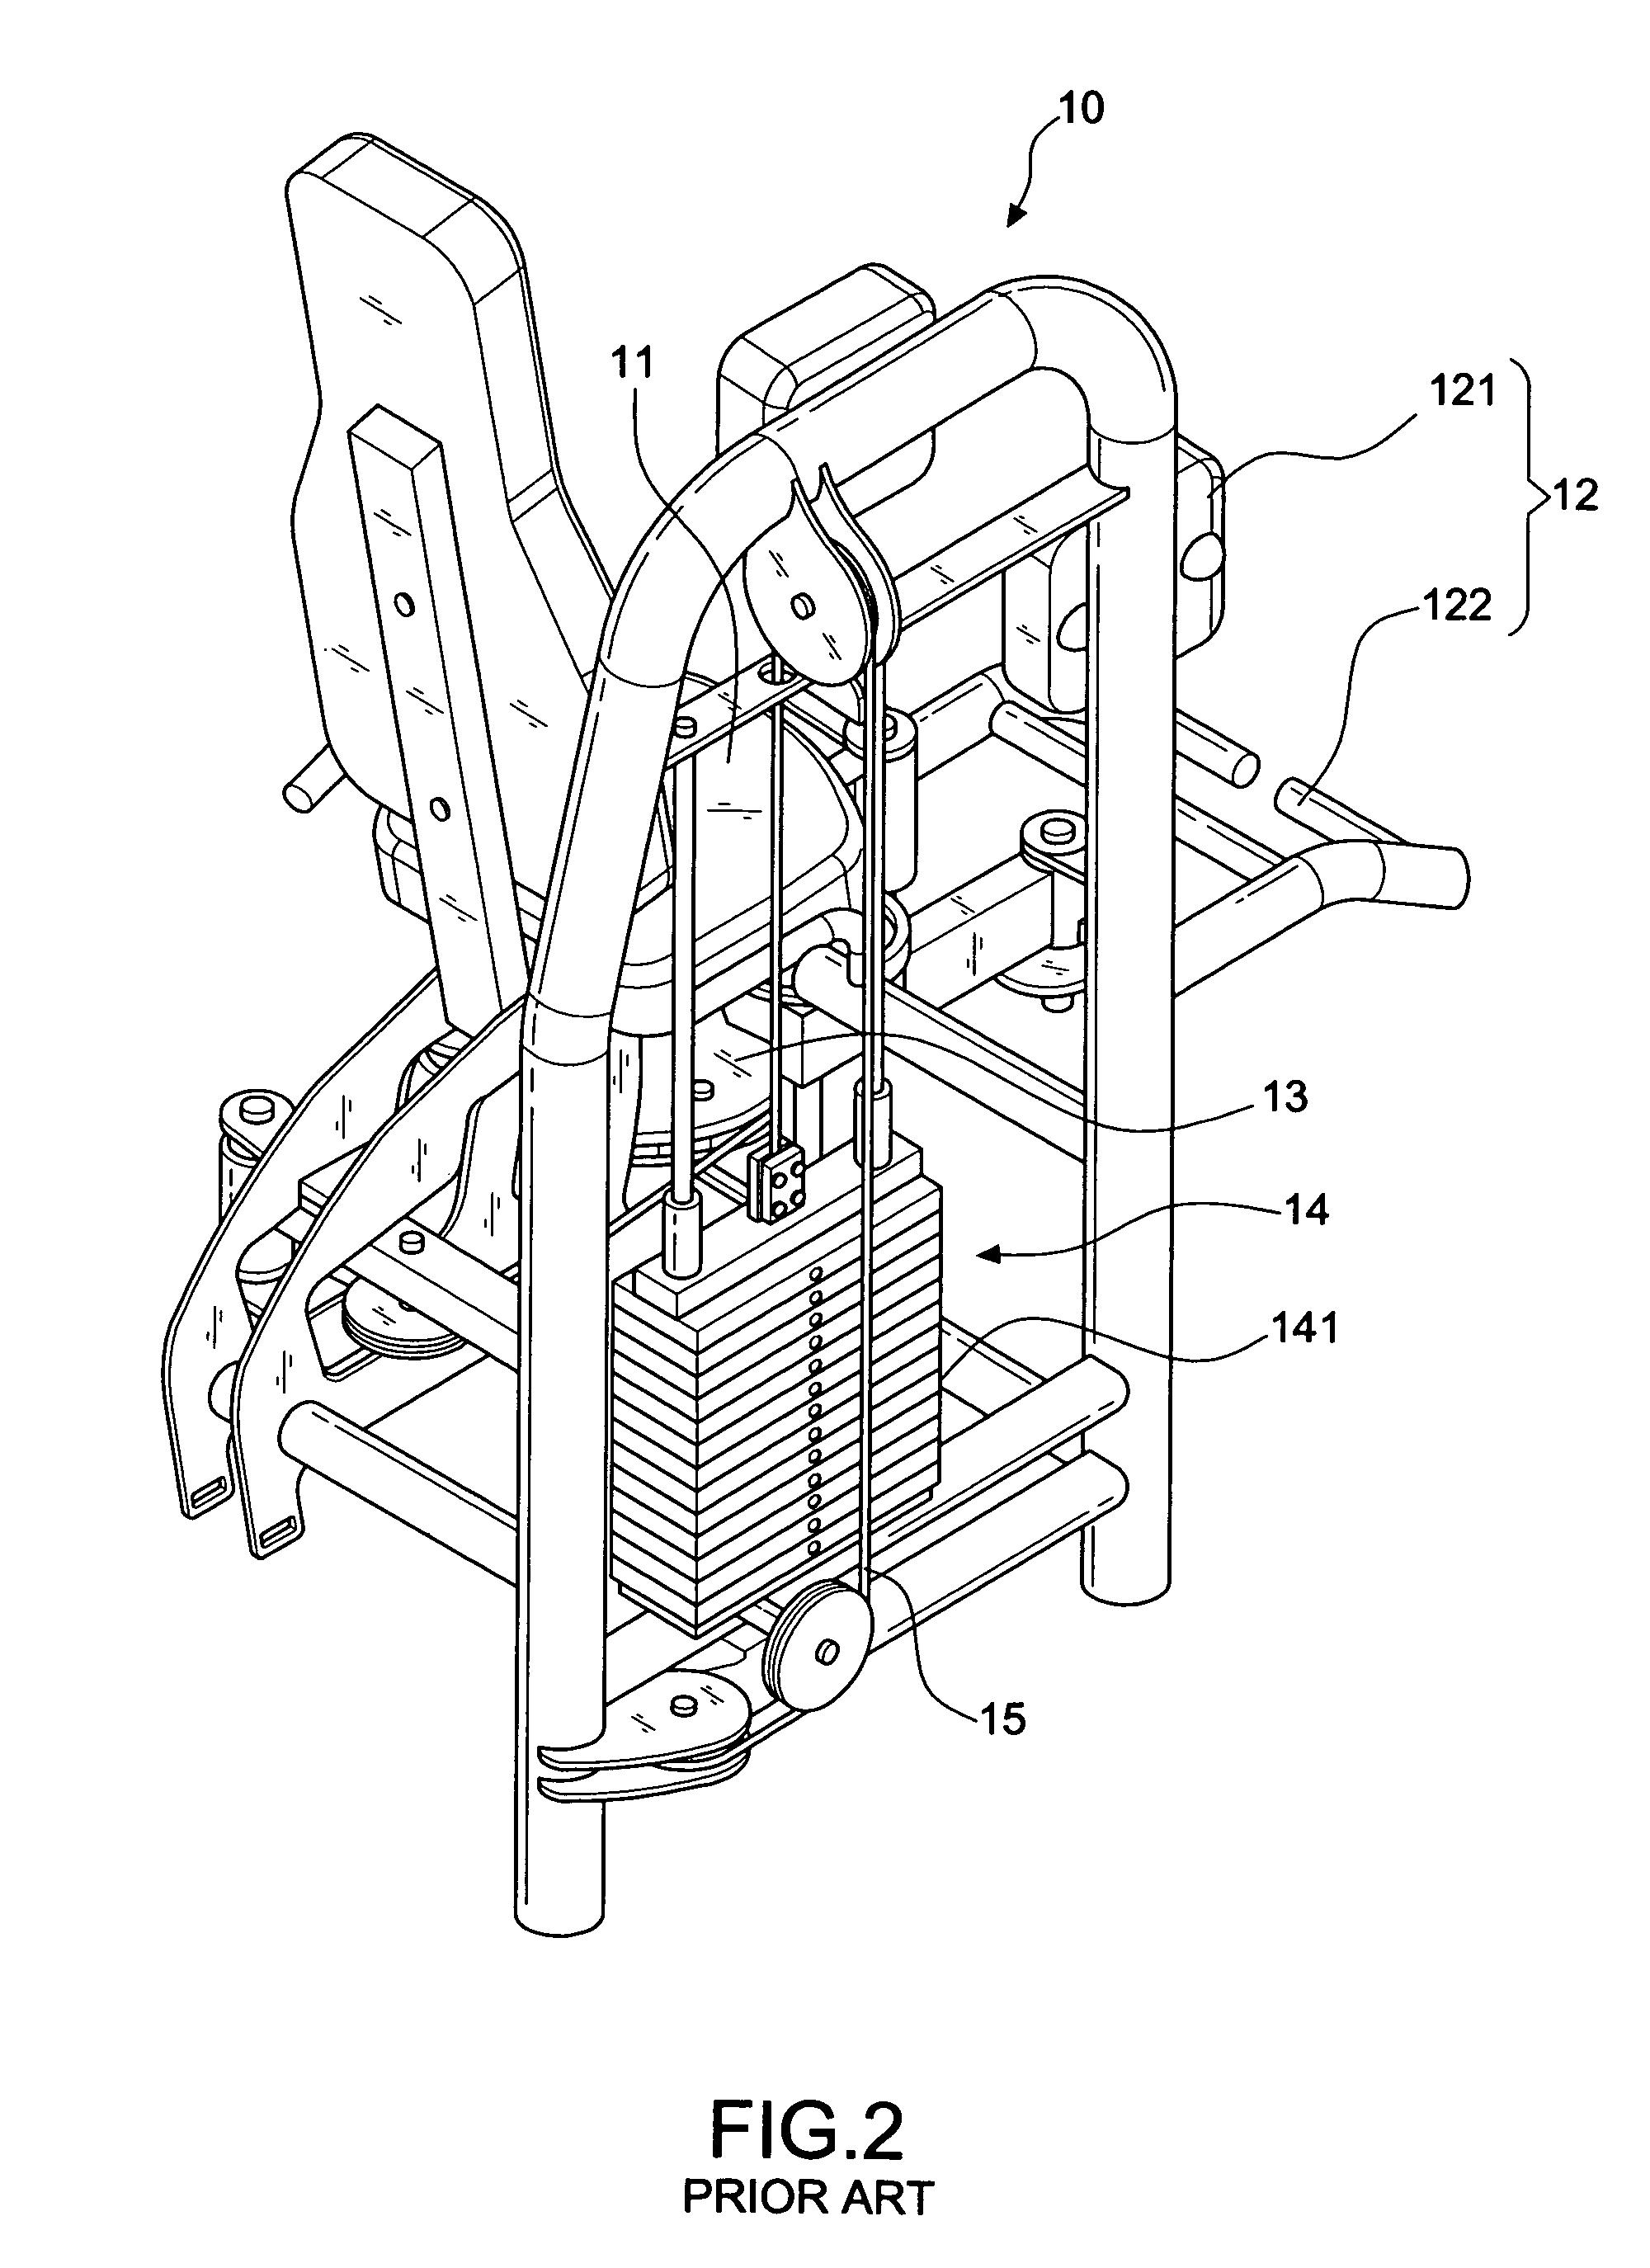 Loading device of leg extension machine